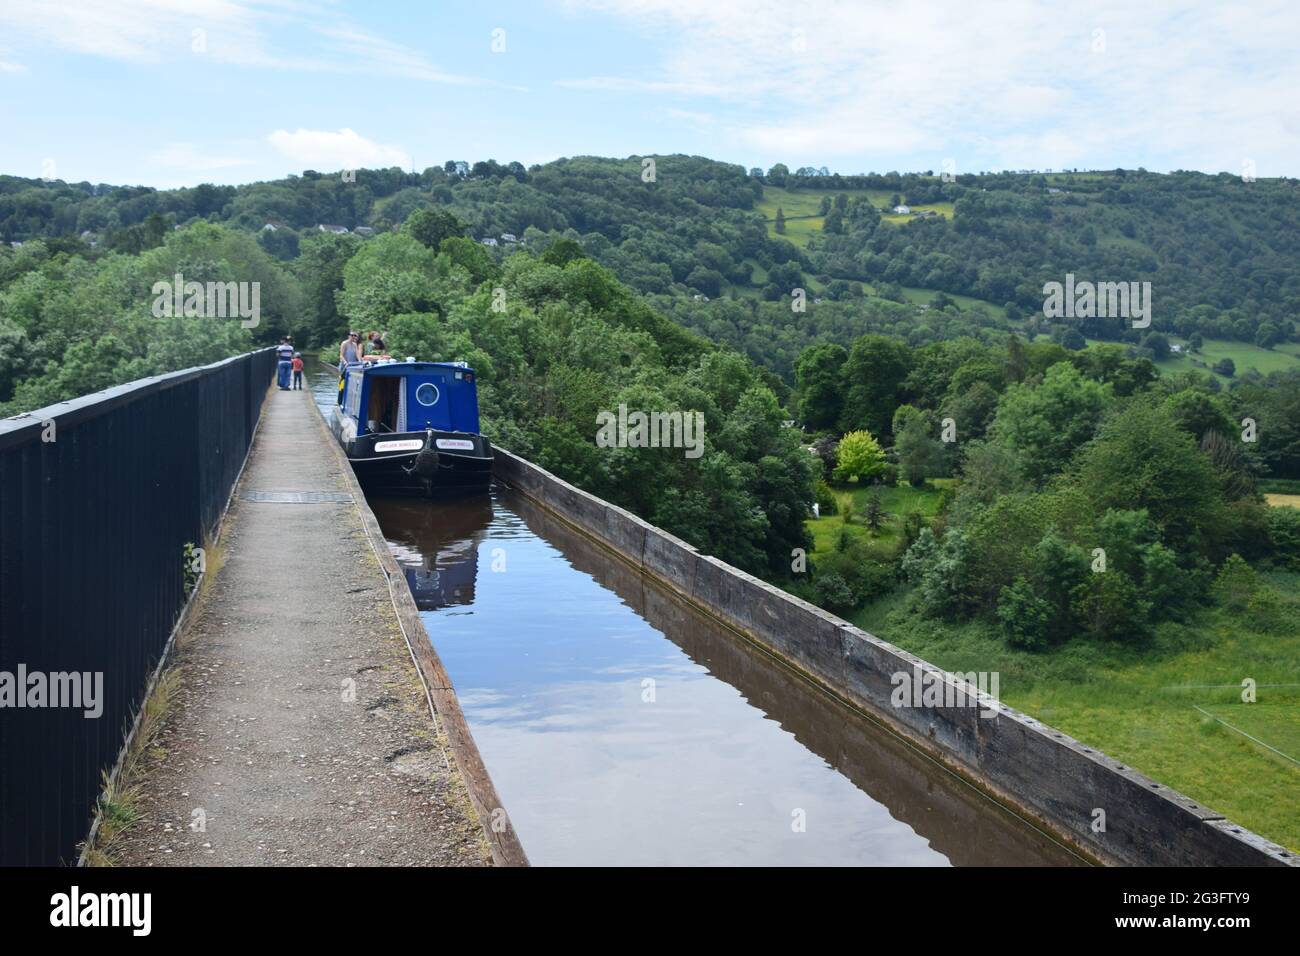 Thomas Telford's impressive Pontcysyllte Aqueduct spanning the  valley of the River Dee, with views from the river and canal boats crossing over top. Stock Photo